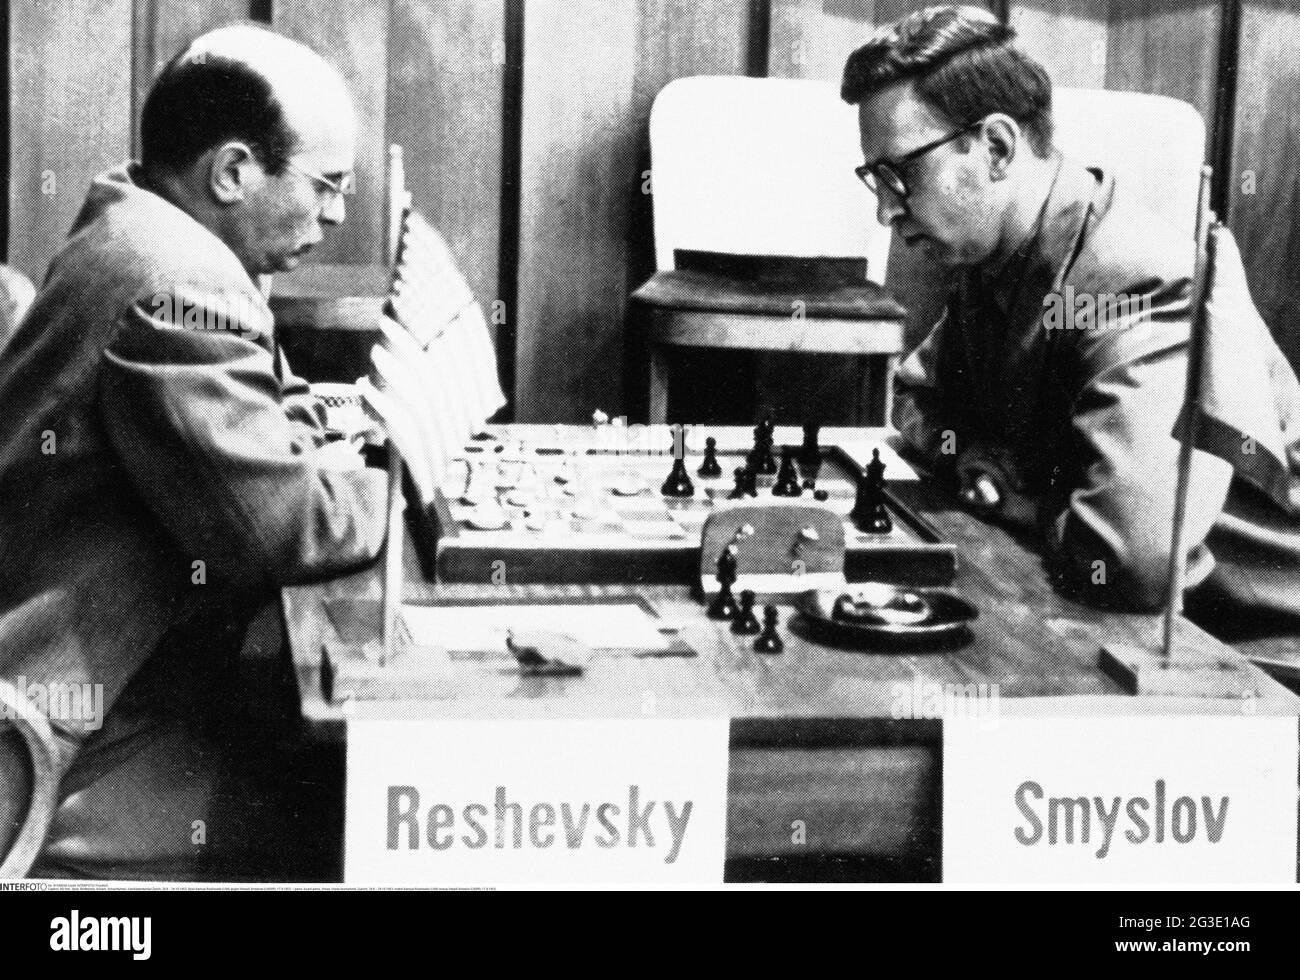 game, board game, chess, chess tournament, Zuerich, 29.8. - 24.10.1953, ADDITIONAL-RIGHTS-CLEARANCE-INFO-NOT-AVAILABLE Stock Photo